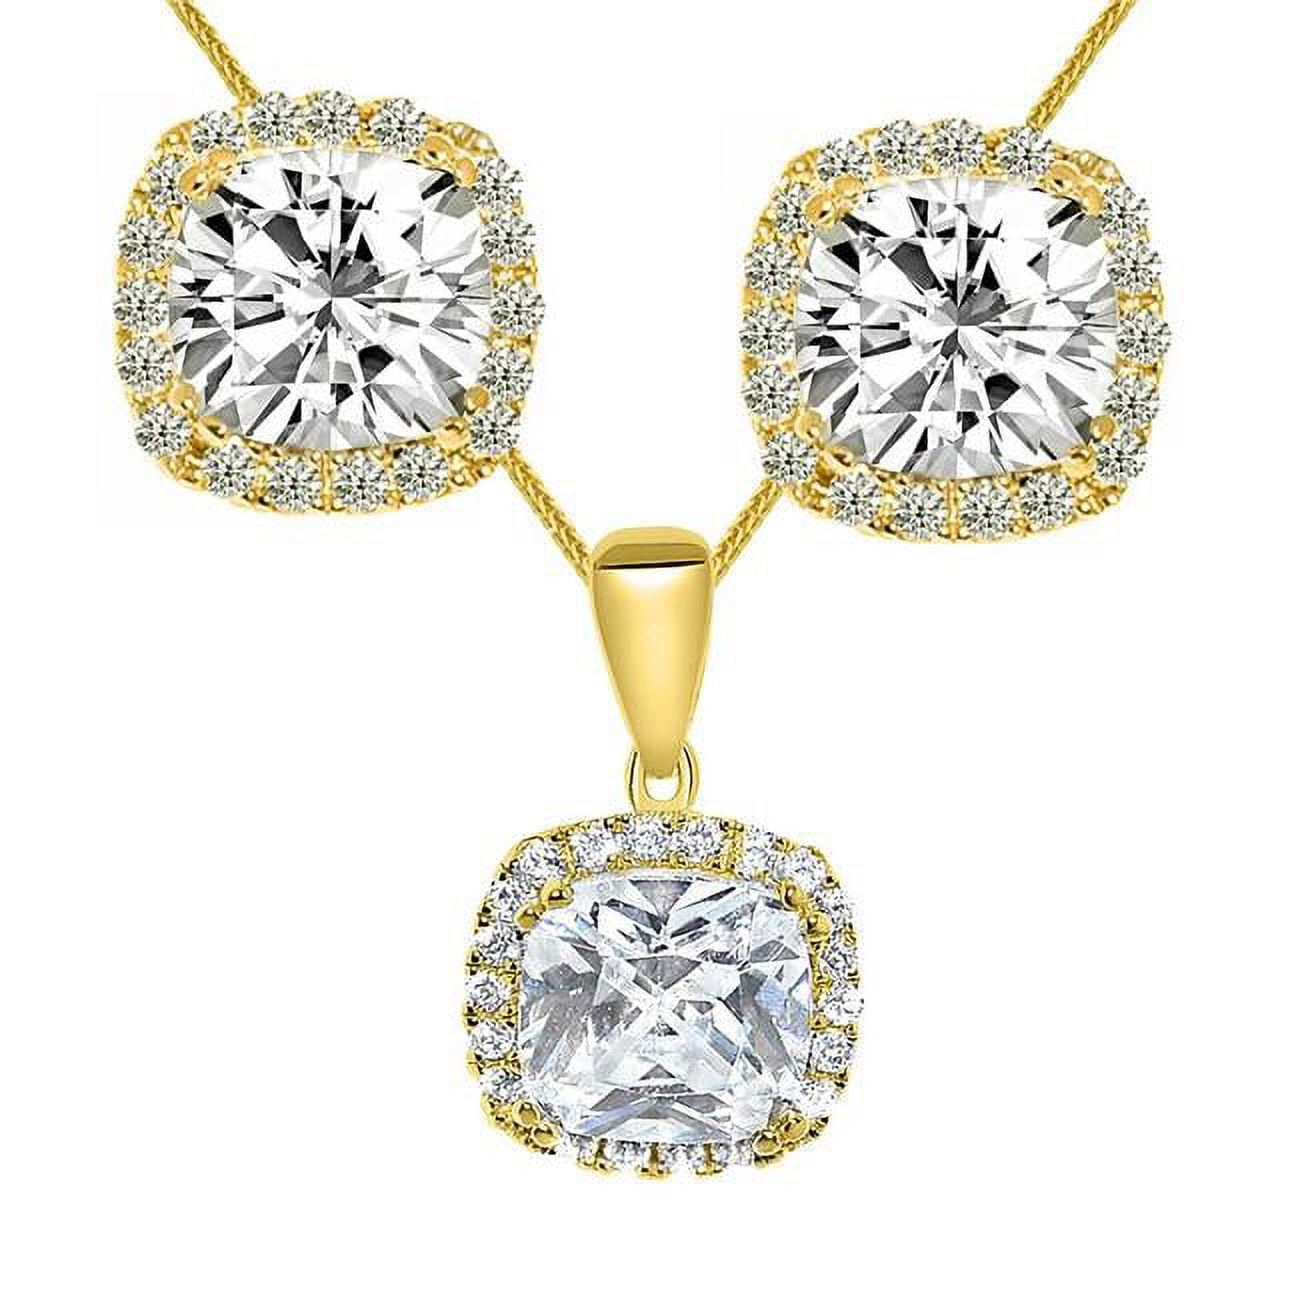 Picture of Precious Stars EP1691-2486-C193-16 16 in. 14K Yellow Gold Cushion-Cut Cubic Zirconia Halo Earring Pendant Set